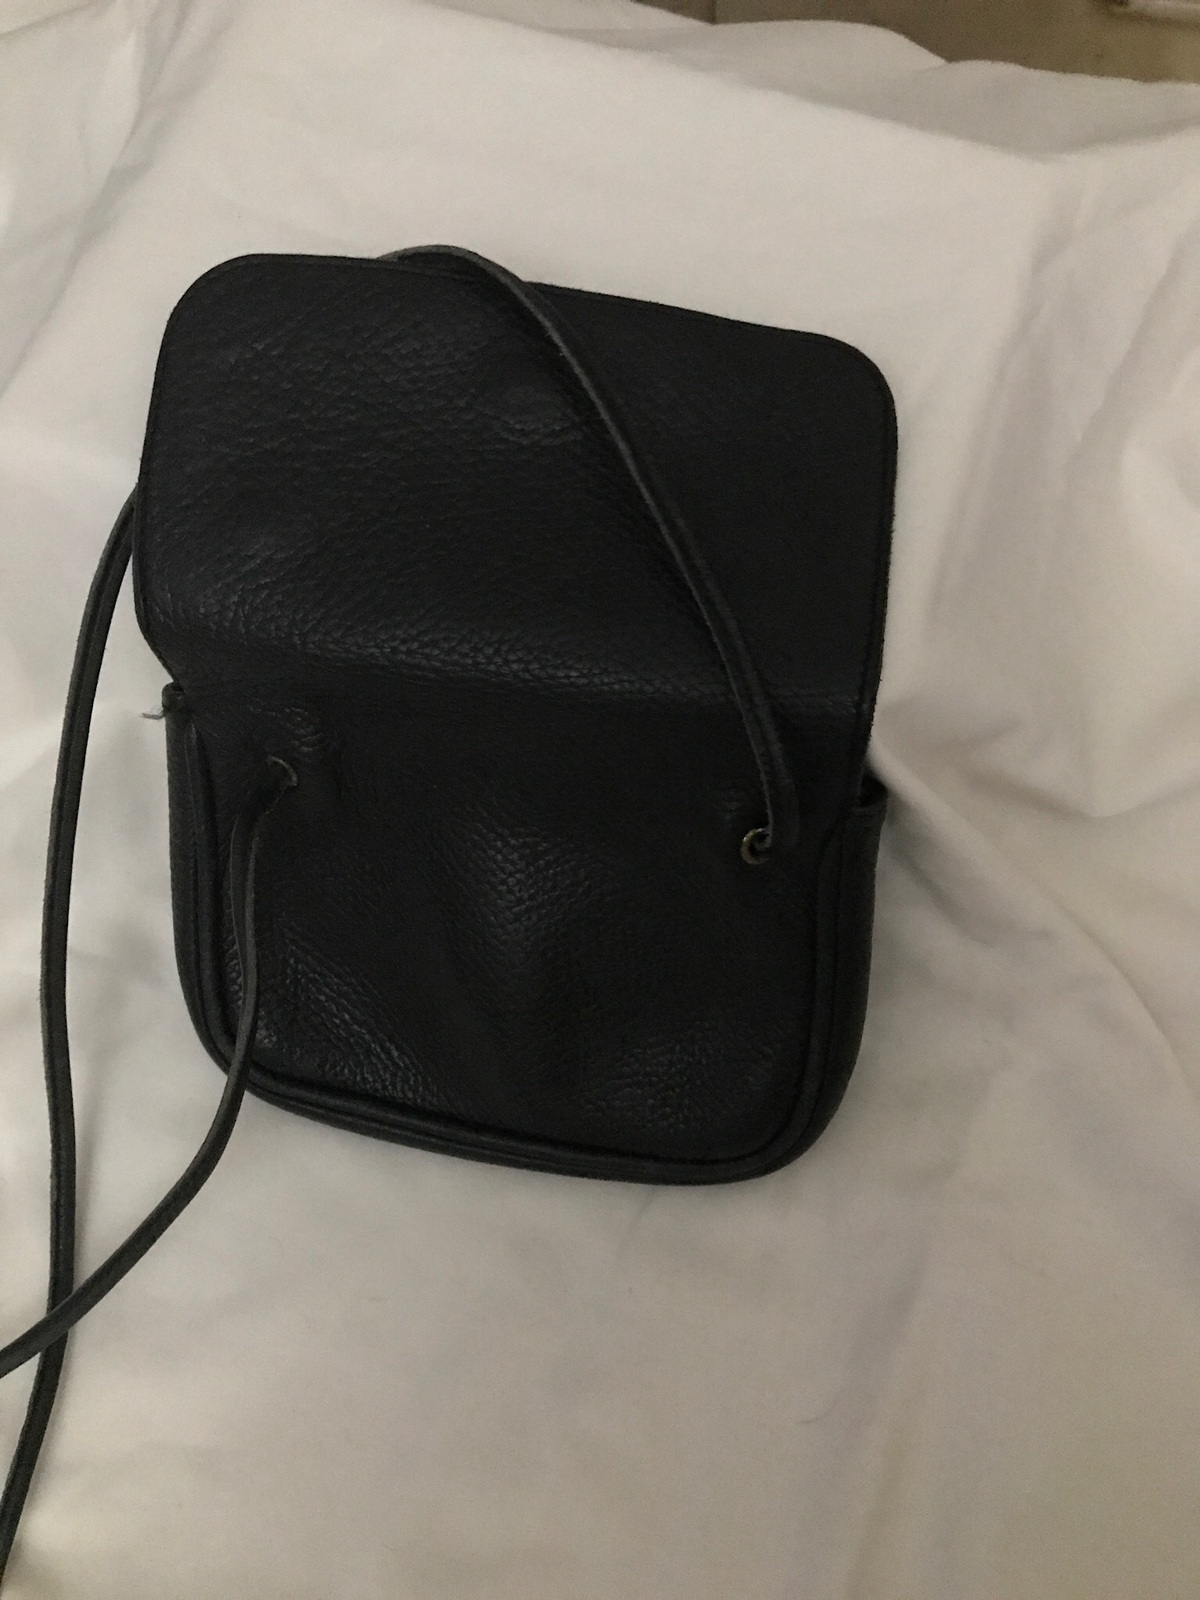 Authentic Roots Black Leather Crossover - Handbags & Purses